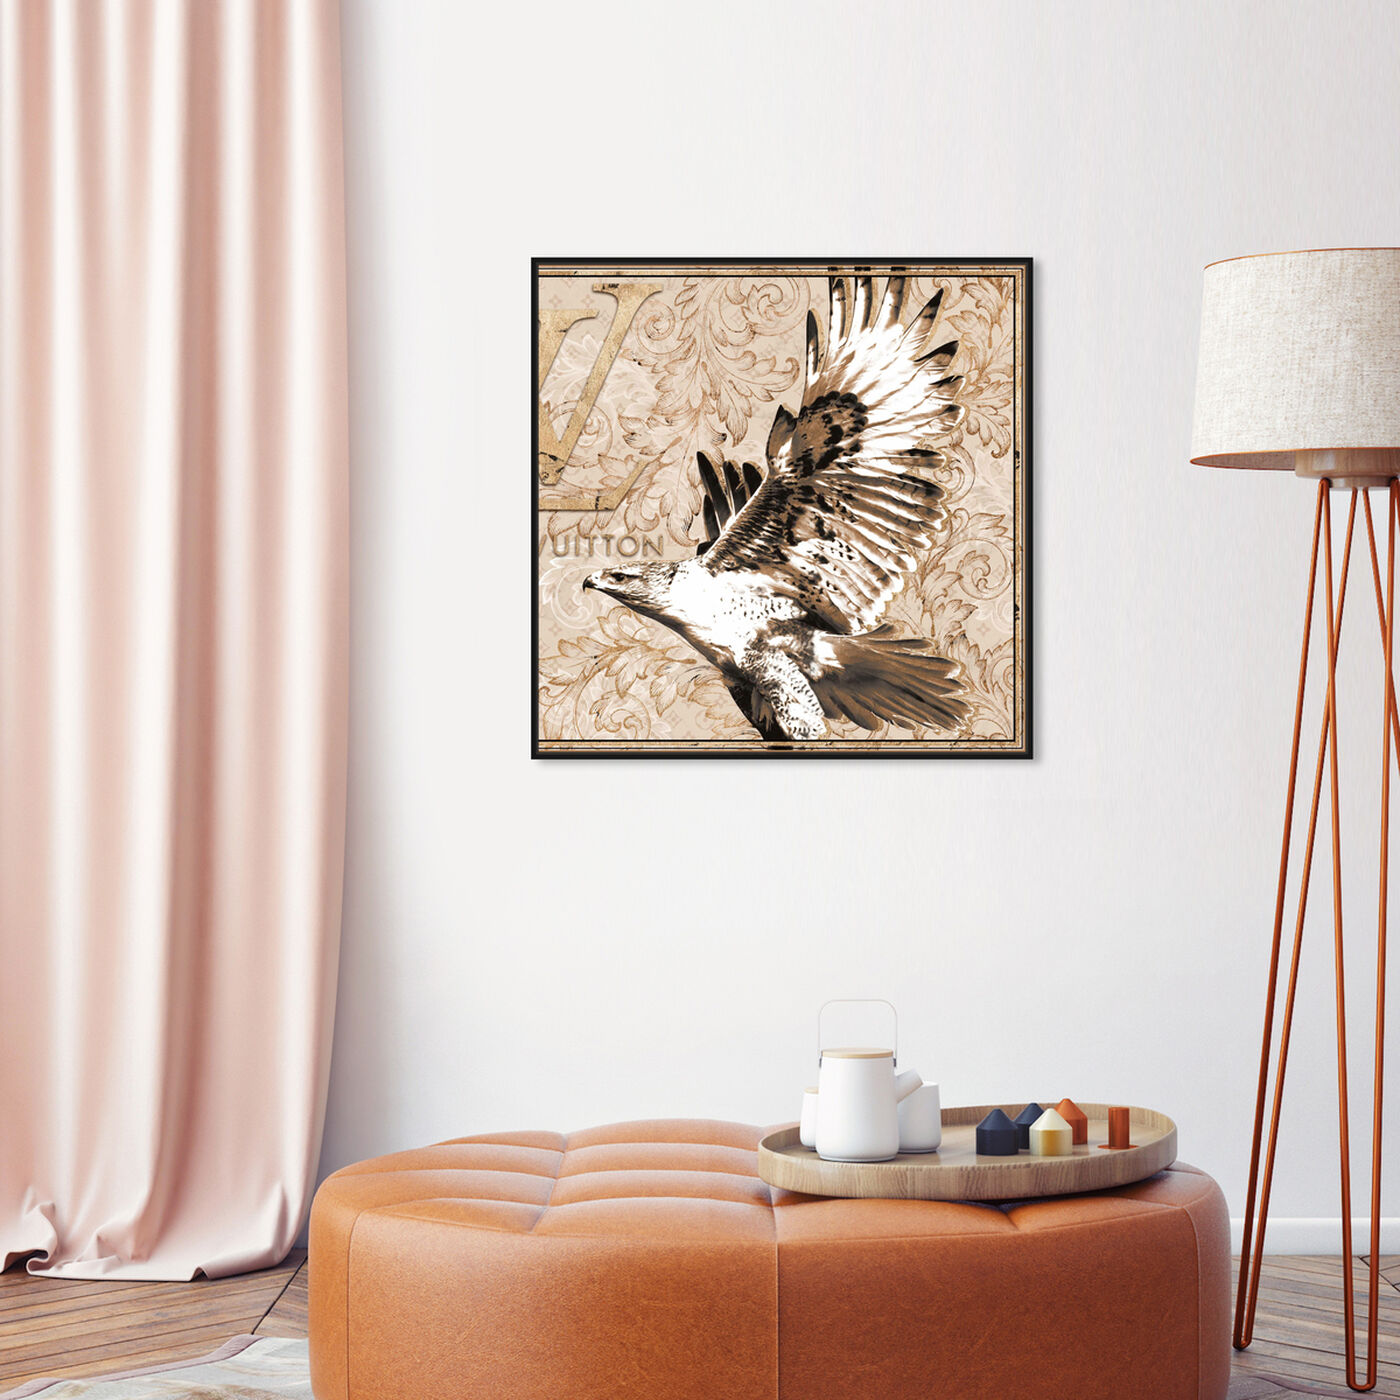 Hanging view of Right Bird of Prey featuring fashion and glam and travel essentials art.